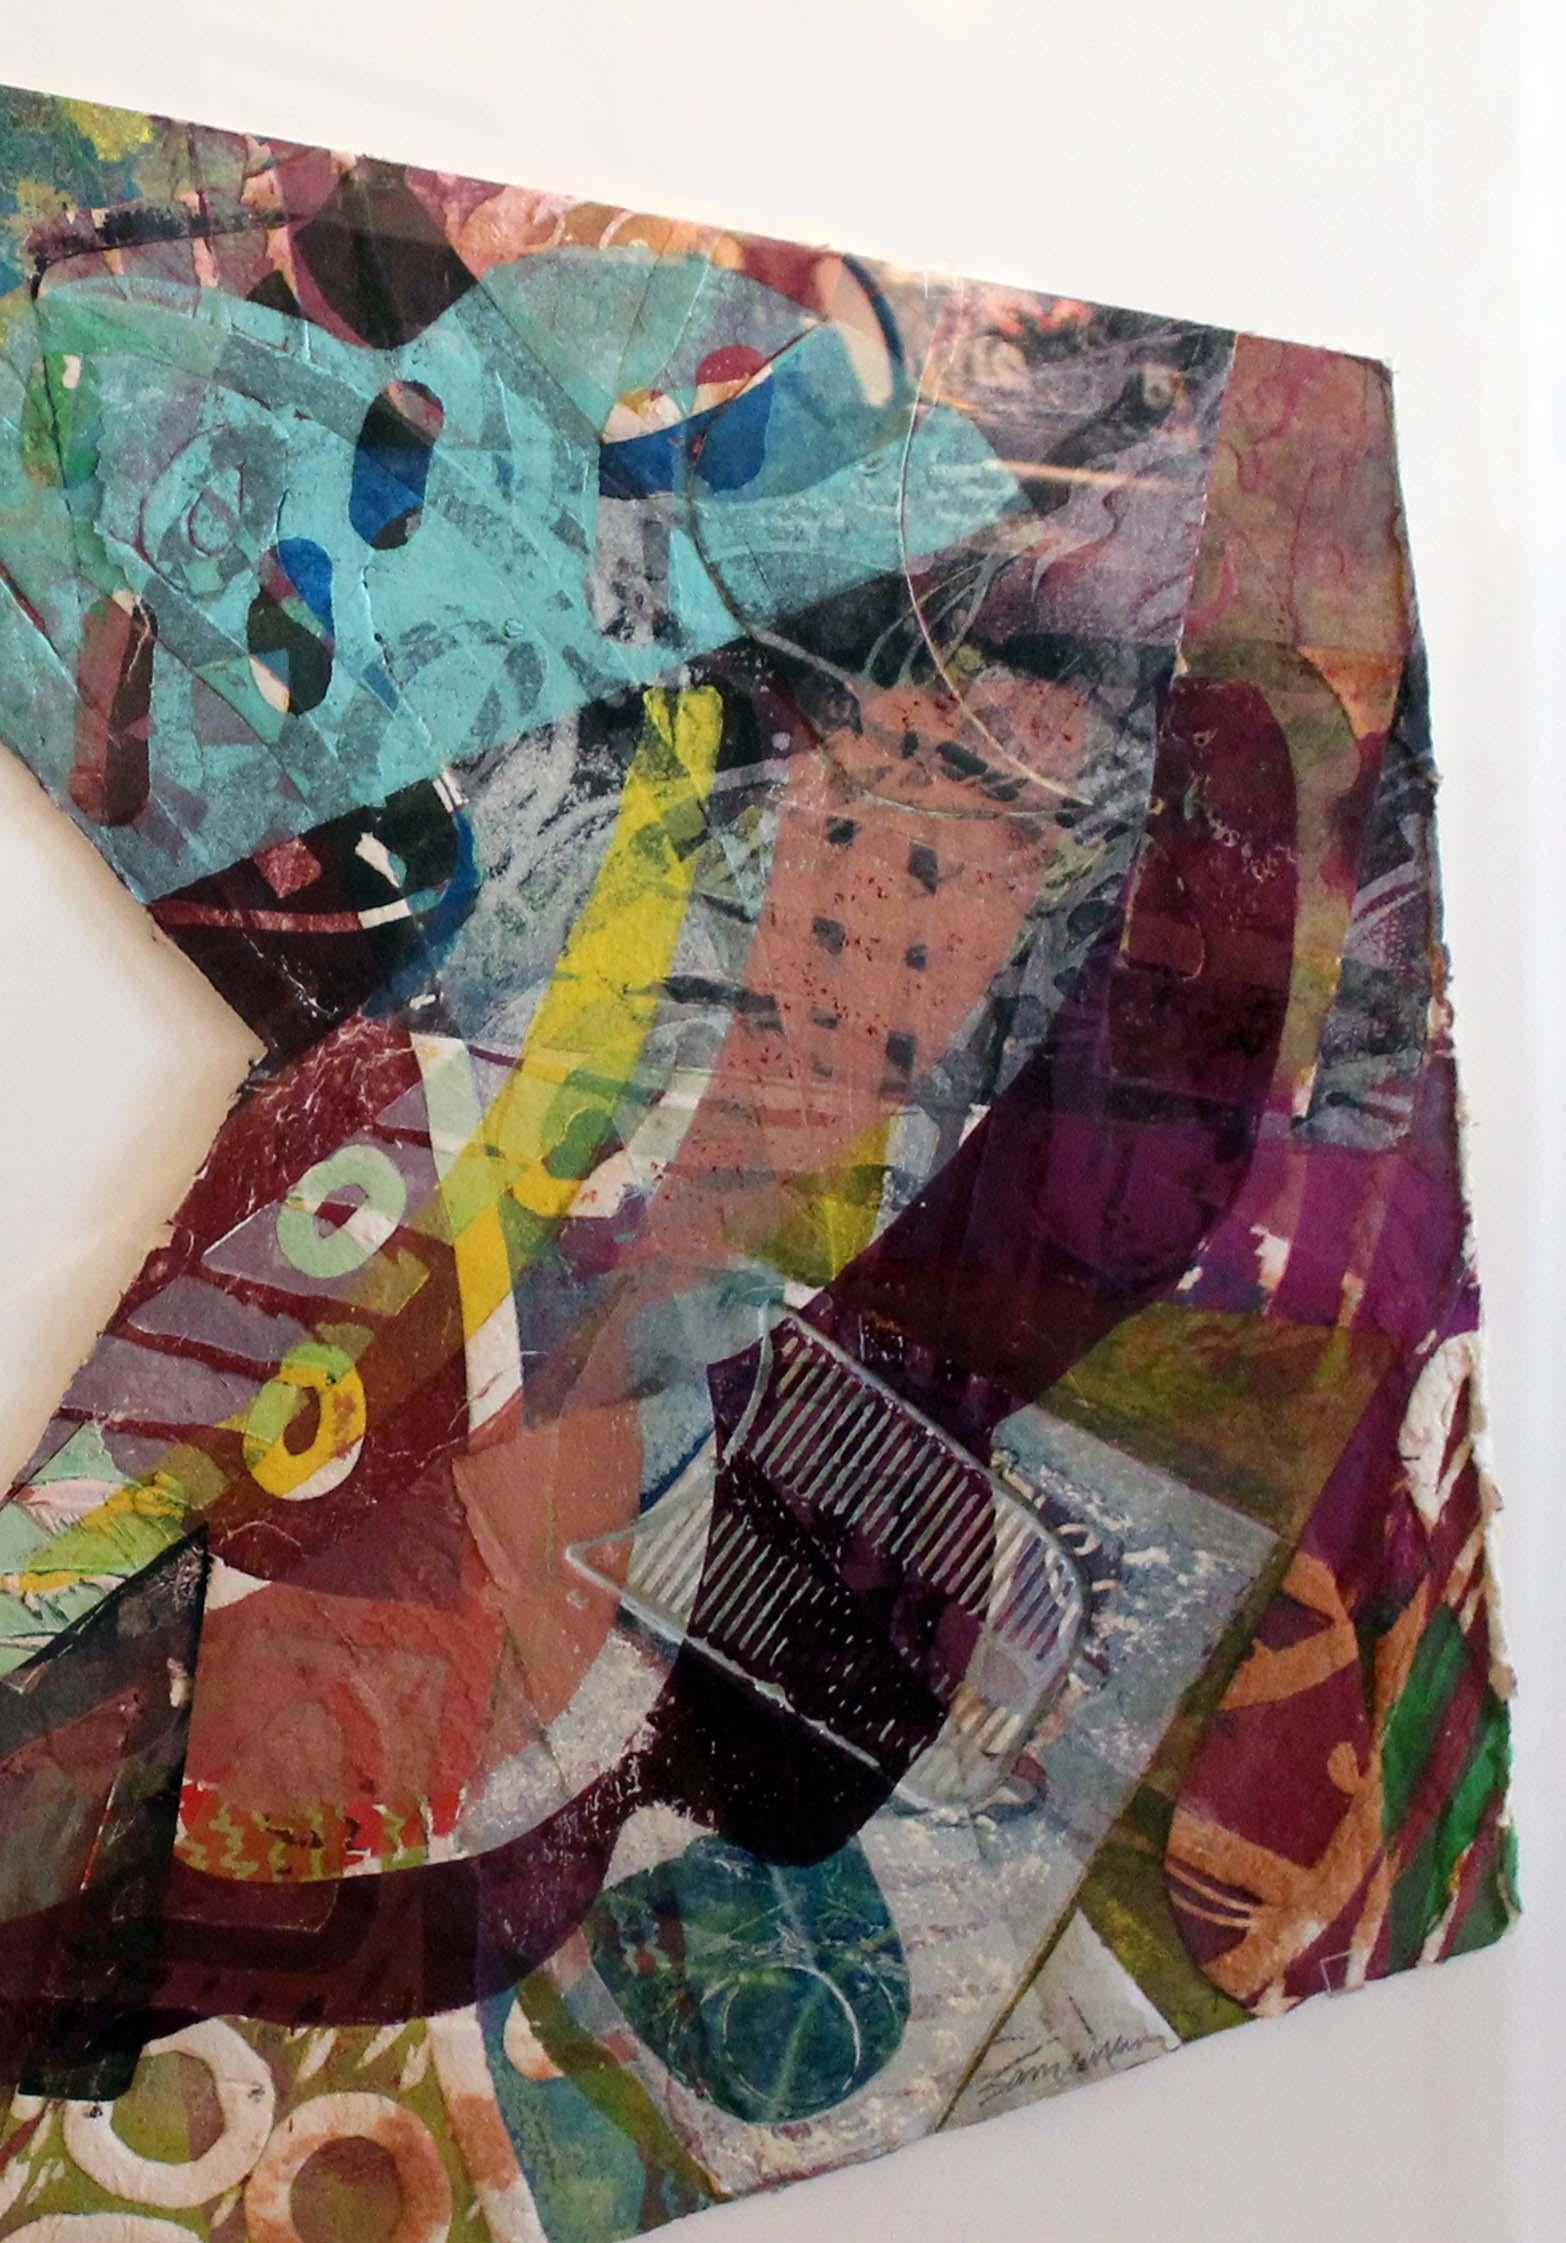 An original mixed media screen print on hand made paper collage by Sam Gilliam, signed and dated 1987.  The piece comes framed in an archival plexiglass shadow box presentation.